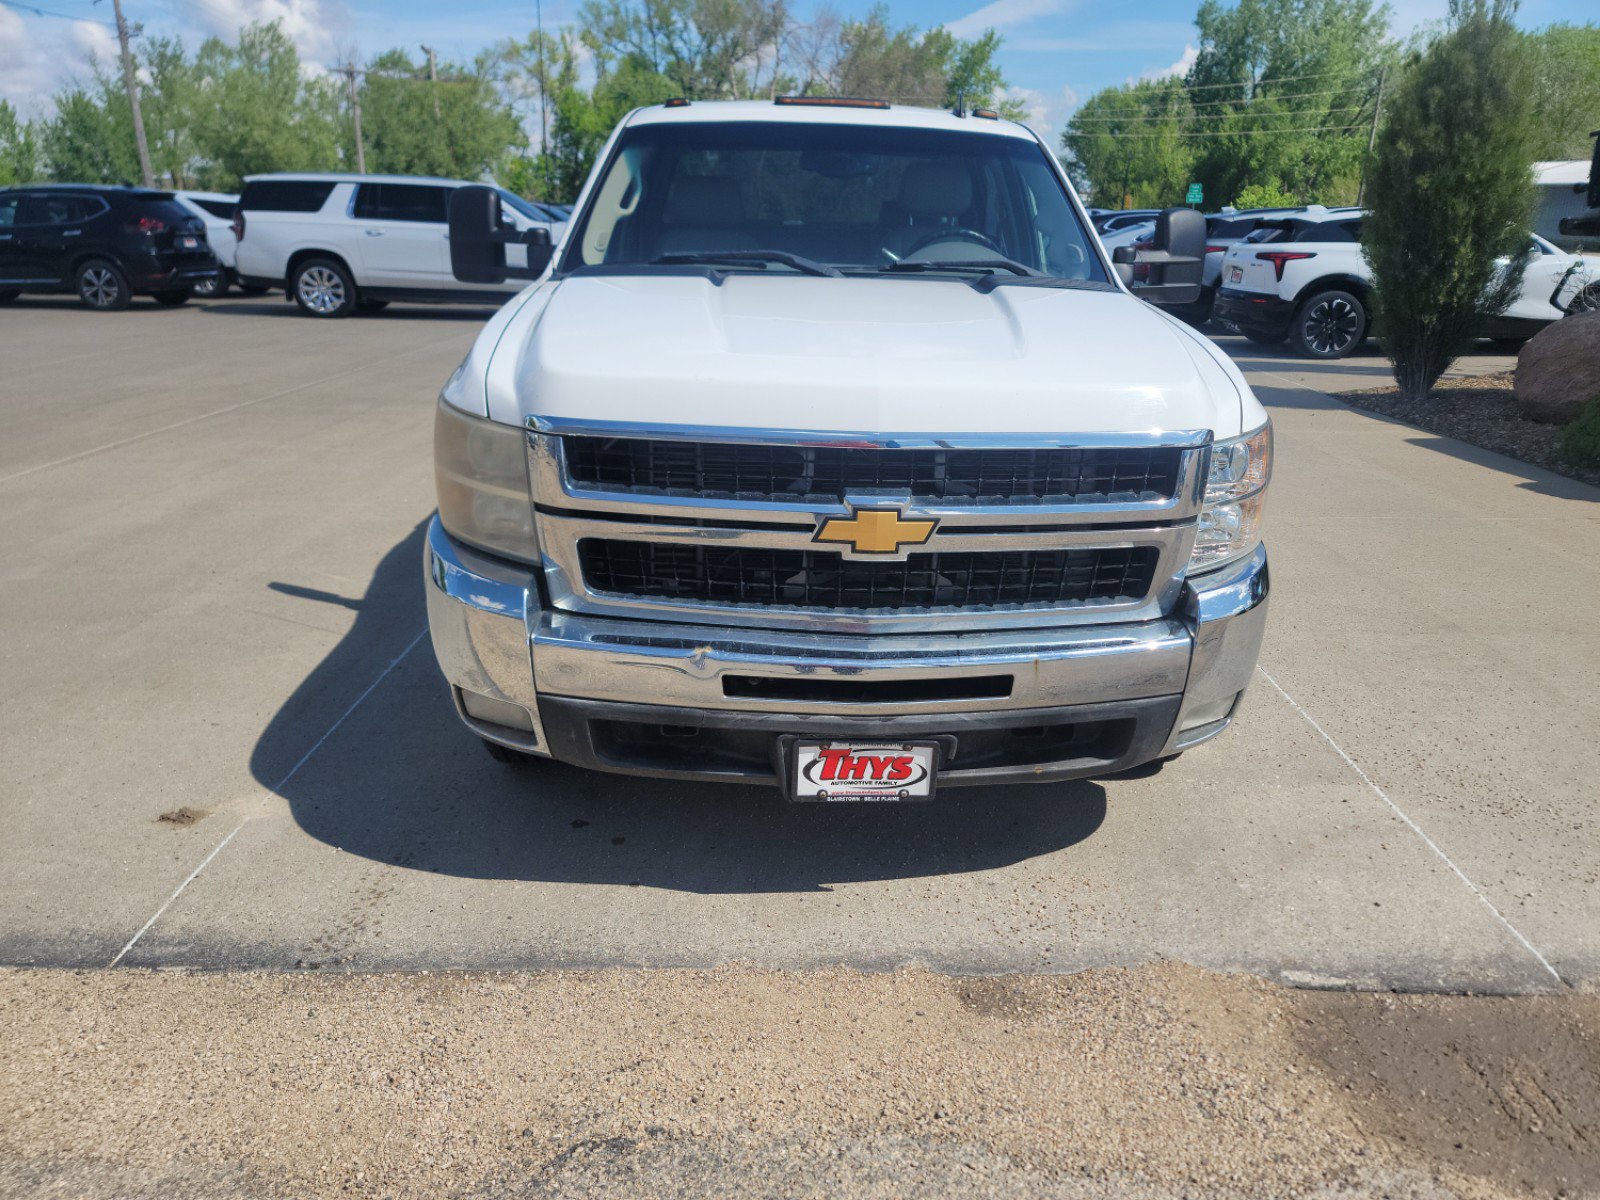 Used 2010 Chevrolet Silverado 3500 LTZ with VIN 1GC7K1B69AF119390 for sale in Blairstown, IA